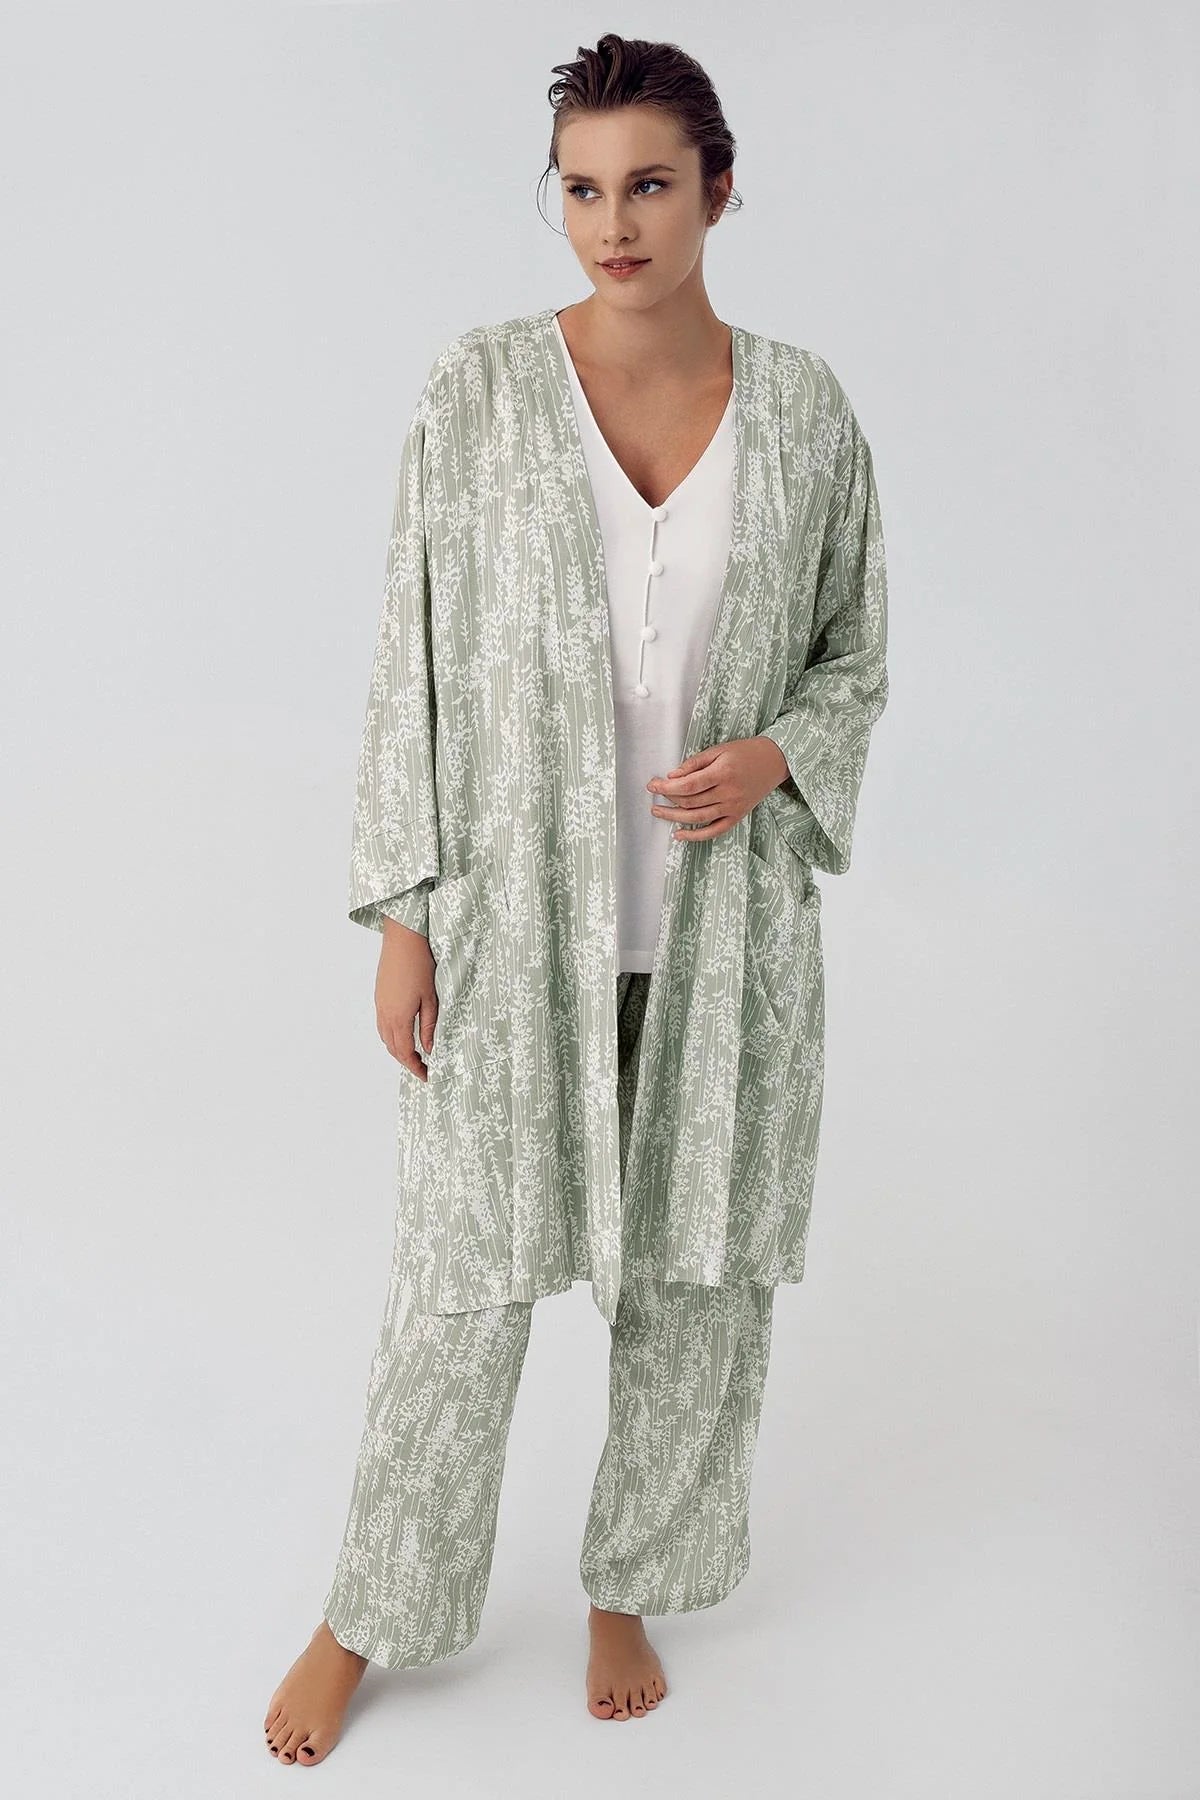 Shopymommy 16300 3-Pieces Maternity & Nursing Pajamas With Patterned Robe Green